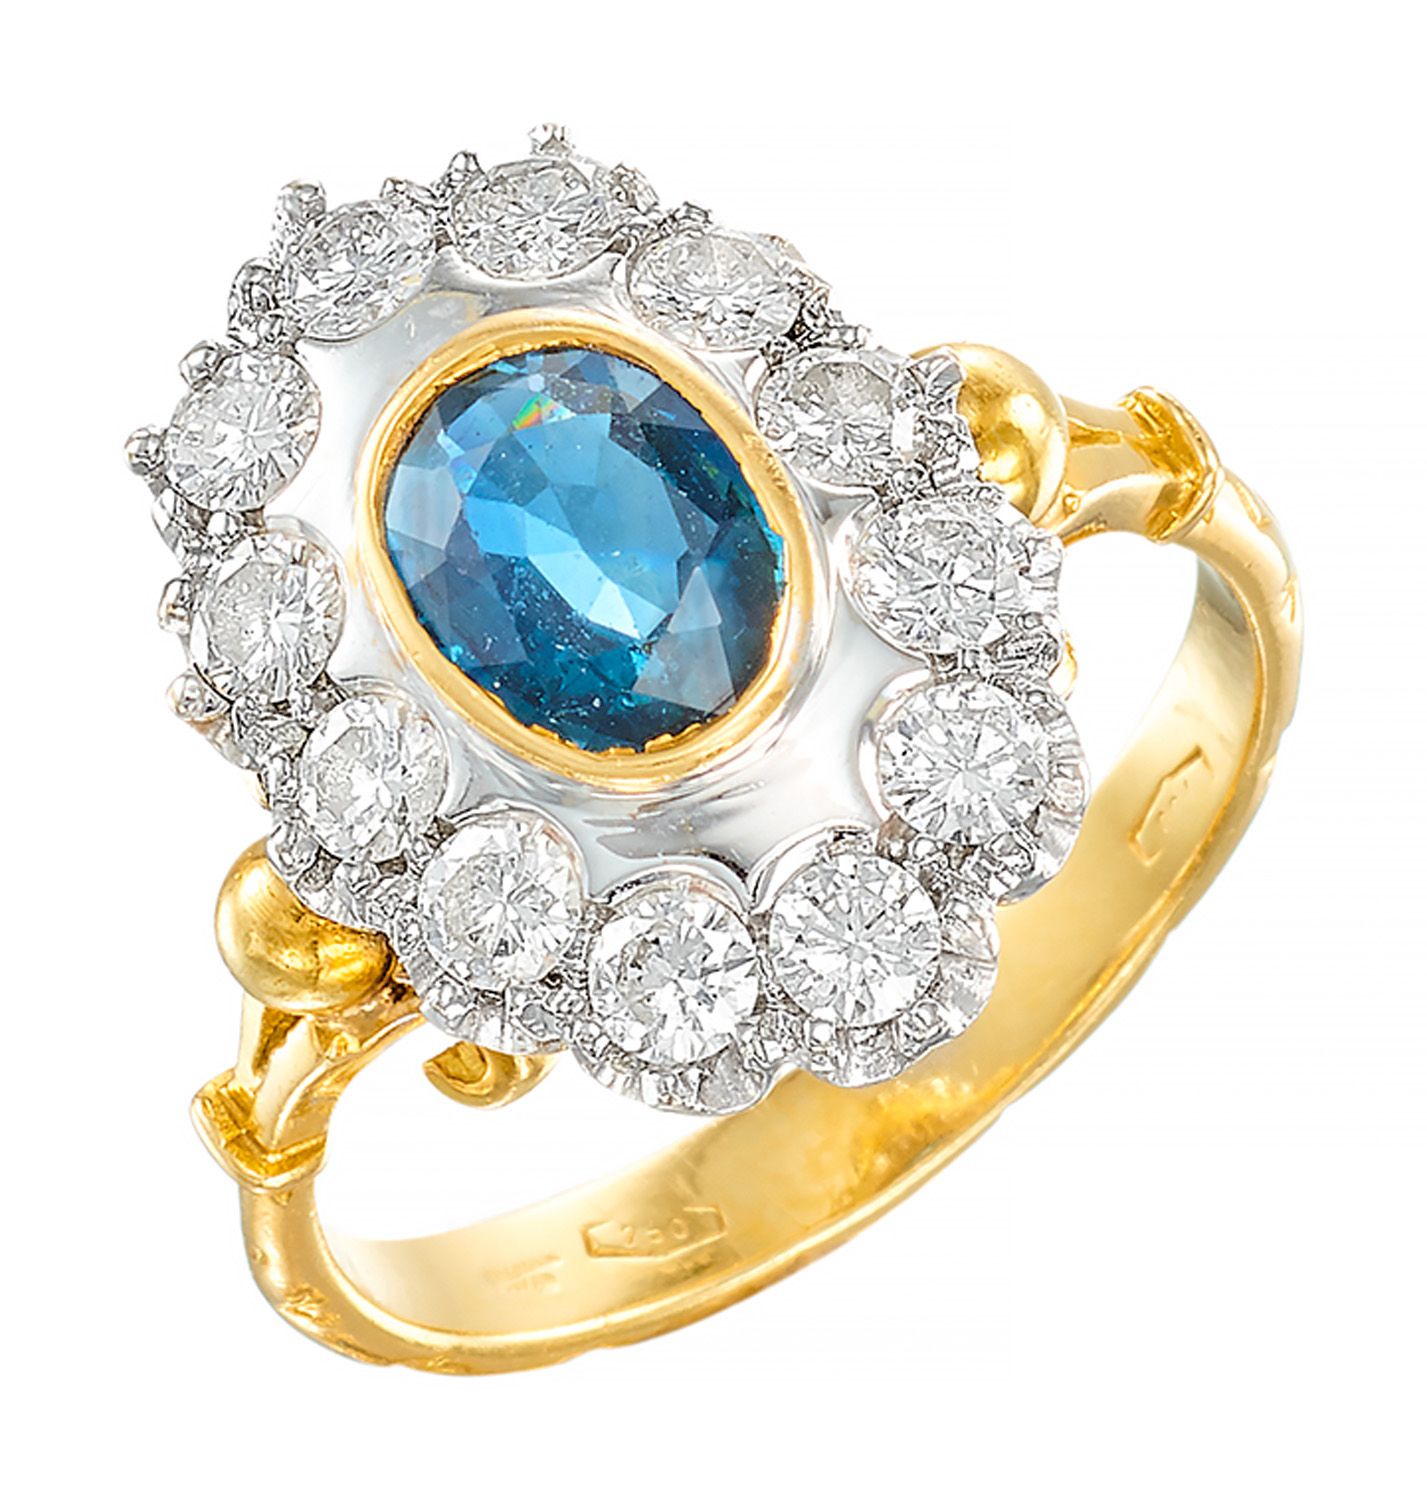 Bague Two-tone gold ring retaining an oval sapphire weighing approx. 1 carat